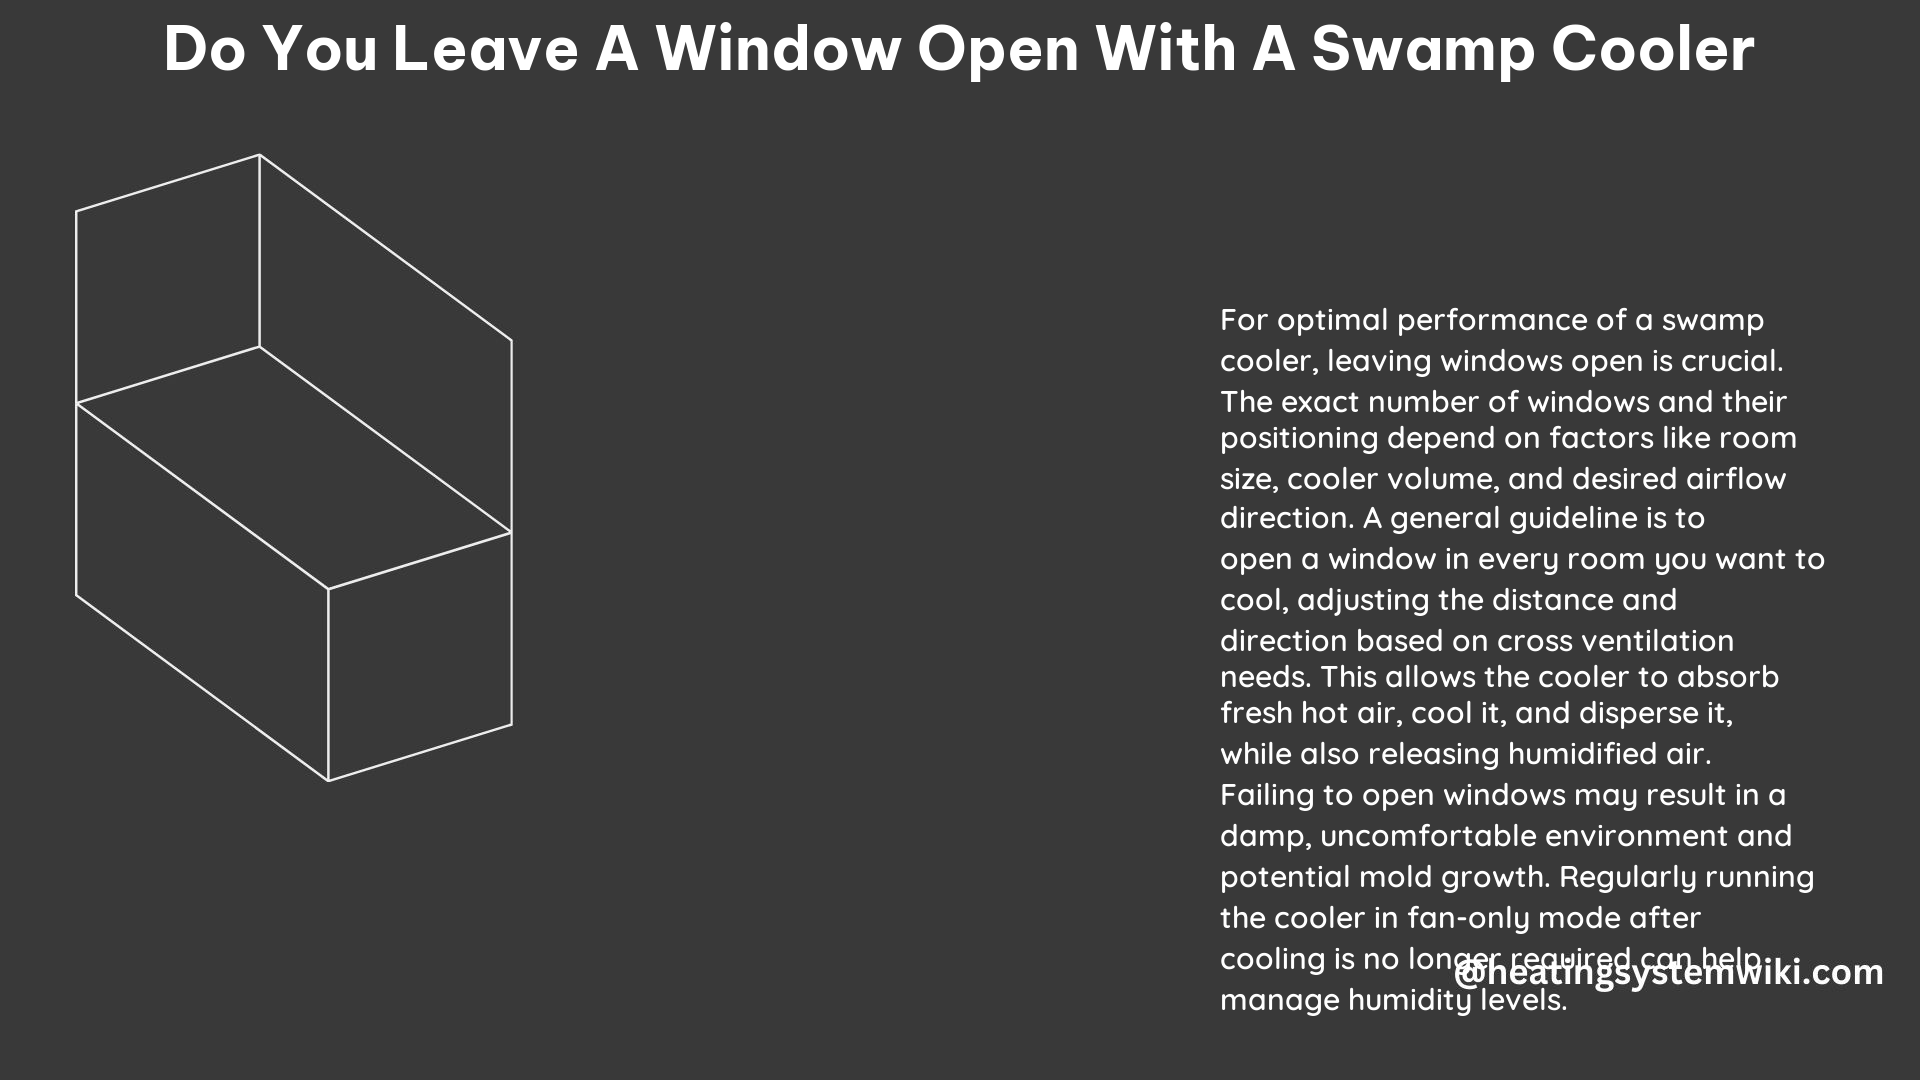 Do You Leave a Window Open With a Swamp Cooler